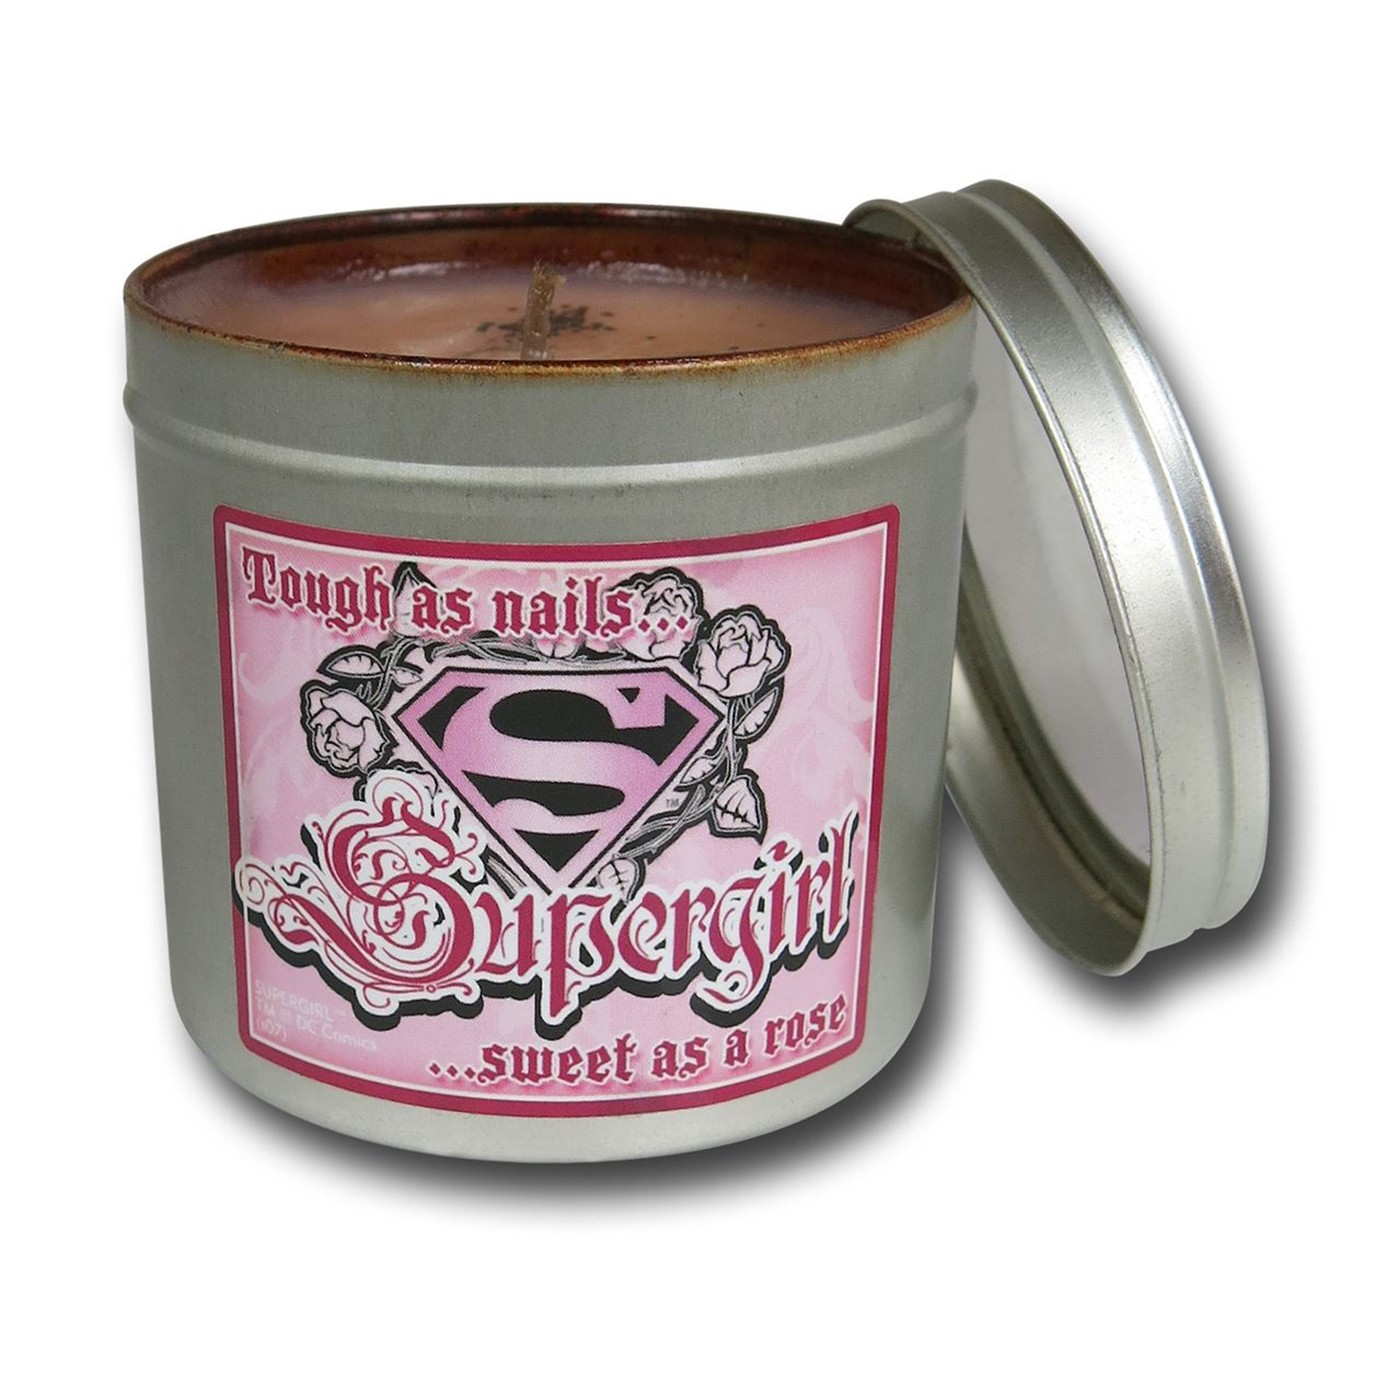 Supergirl Rose Scented Candle in Tin